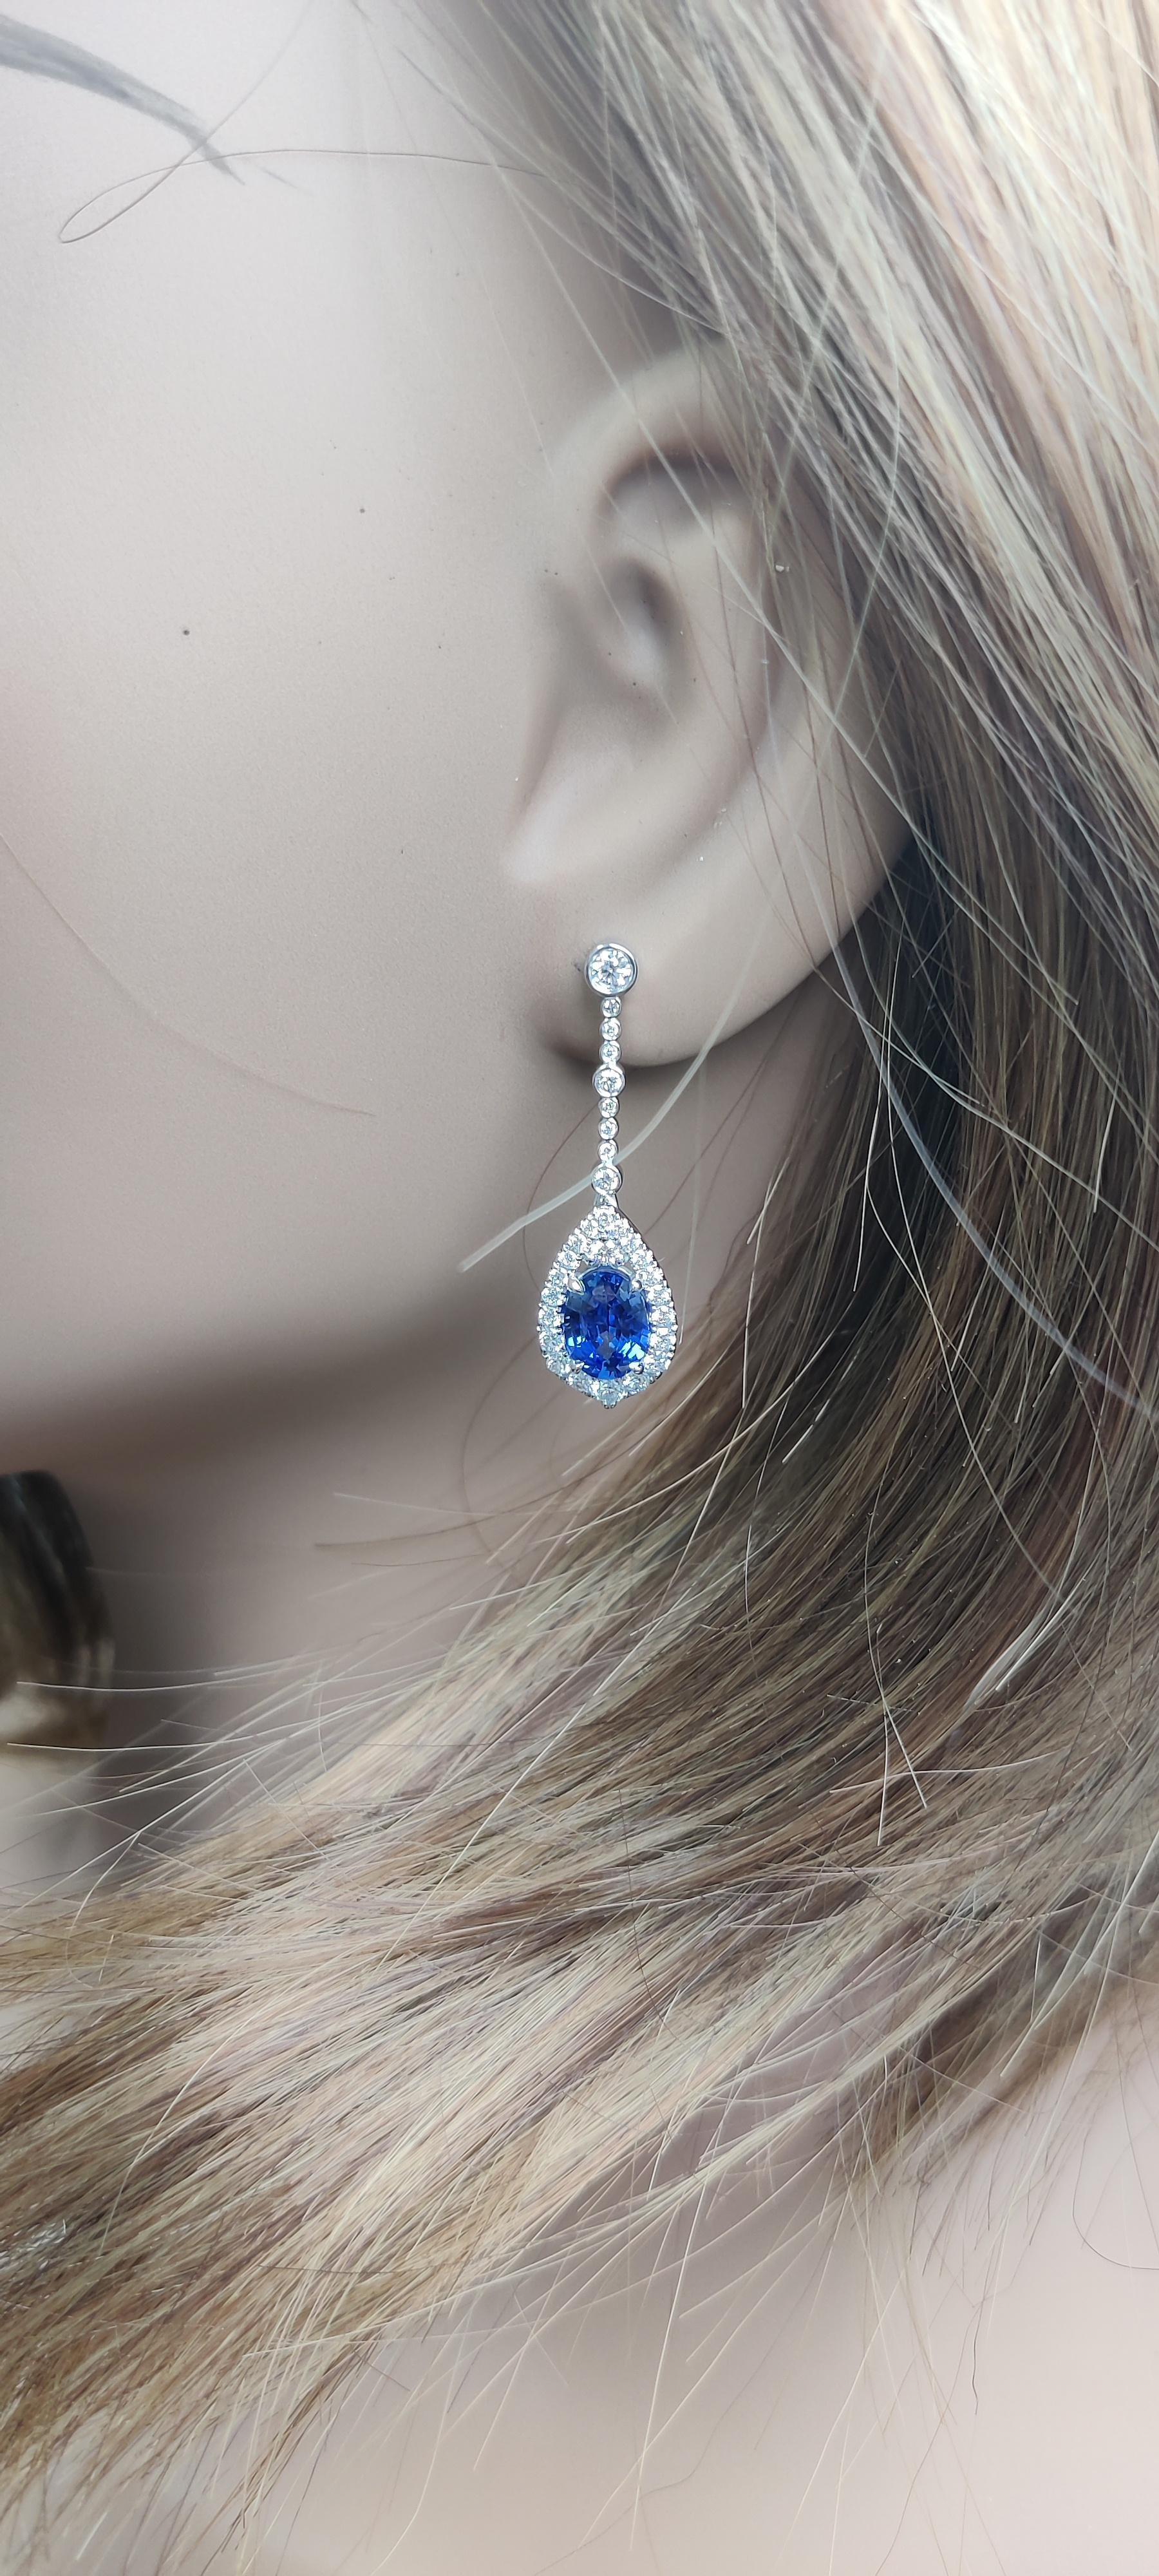 RareGemWorld's classic sapphire earrings. Mounted in a beautiful 18K White Gold setting with natural oval cut blue sapphires. The sapphires are surrounded by natural round white diamond melee. These earrings are guaranteed to impress and enhance